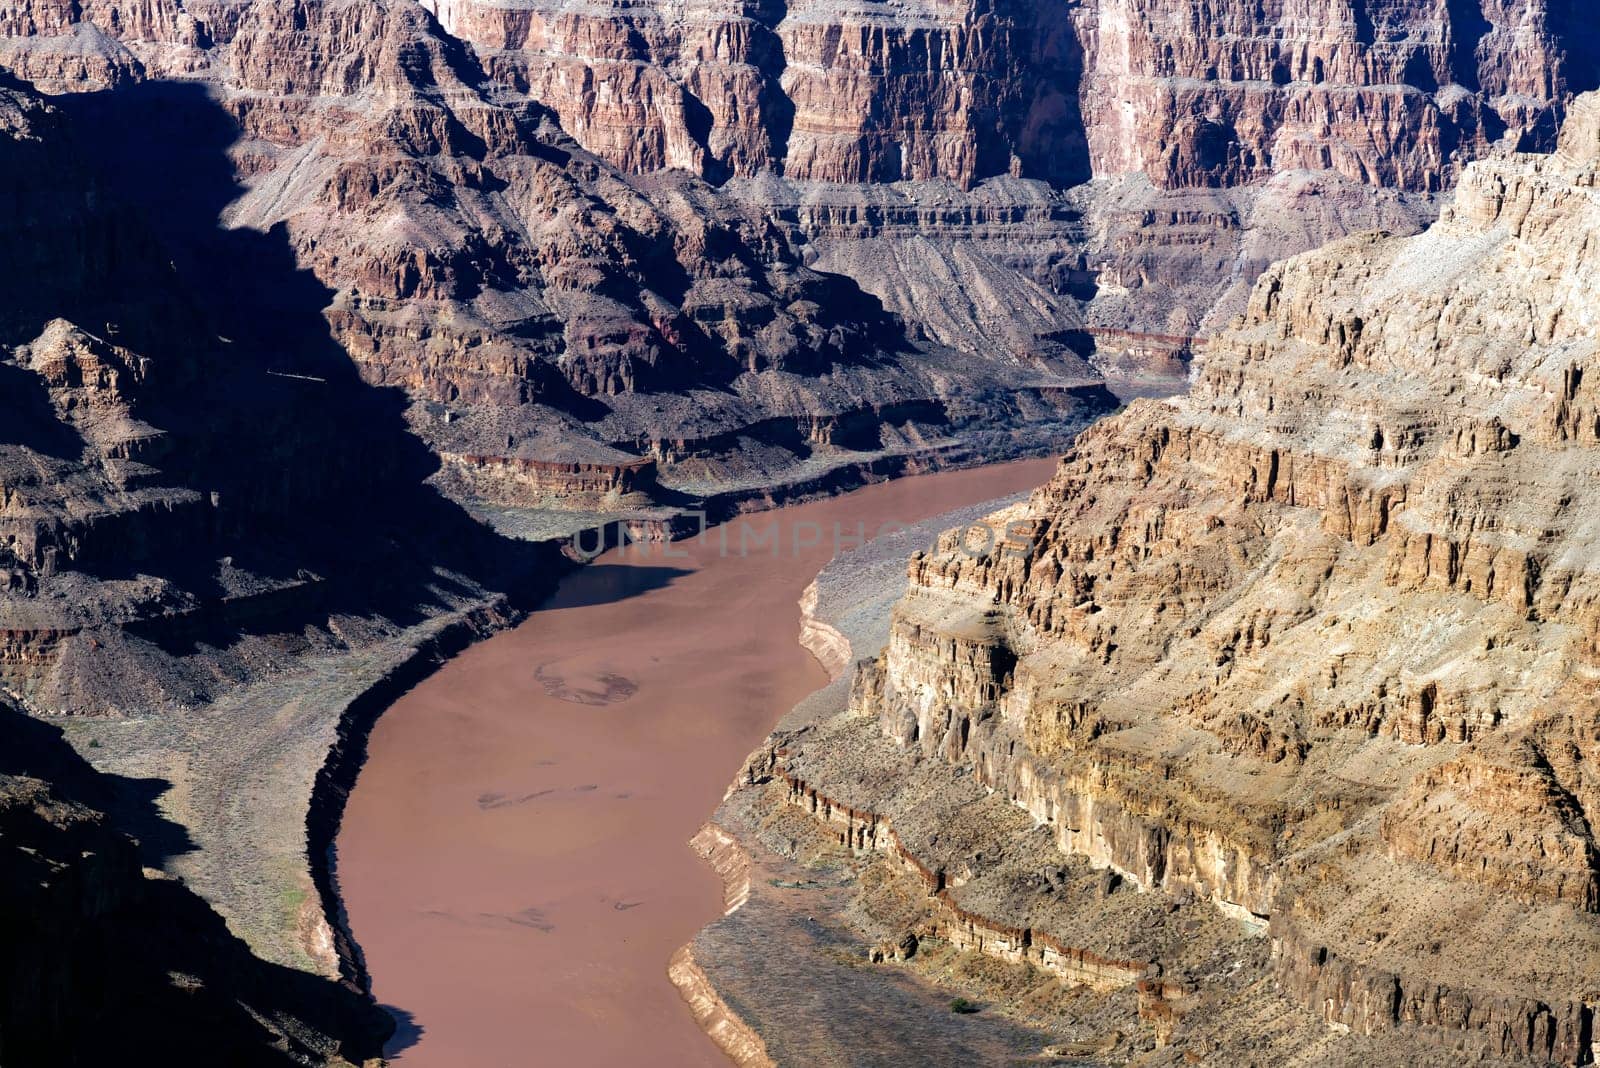 Colorado River at Grand Canyon West: Elevation 1,160 ft-Nature's Grand Design by OliveiraTP